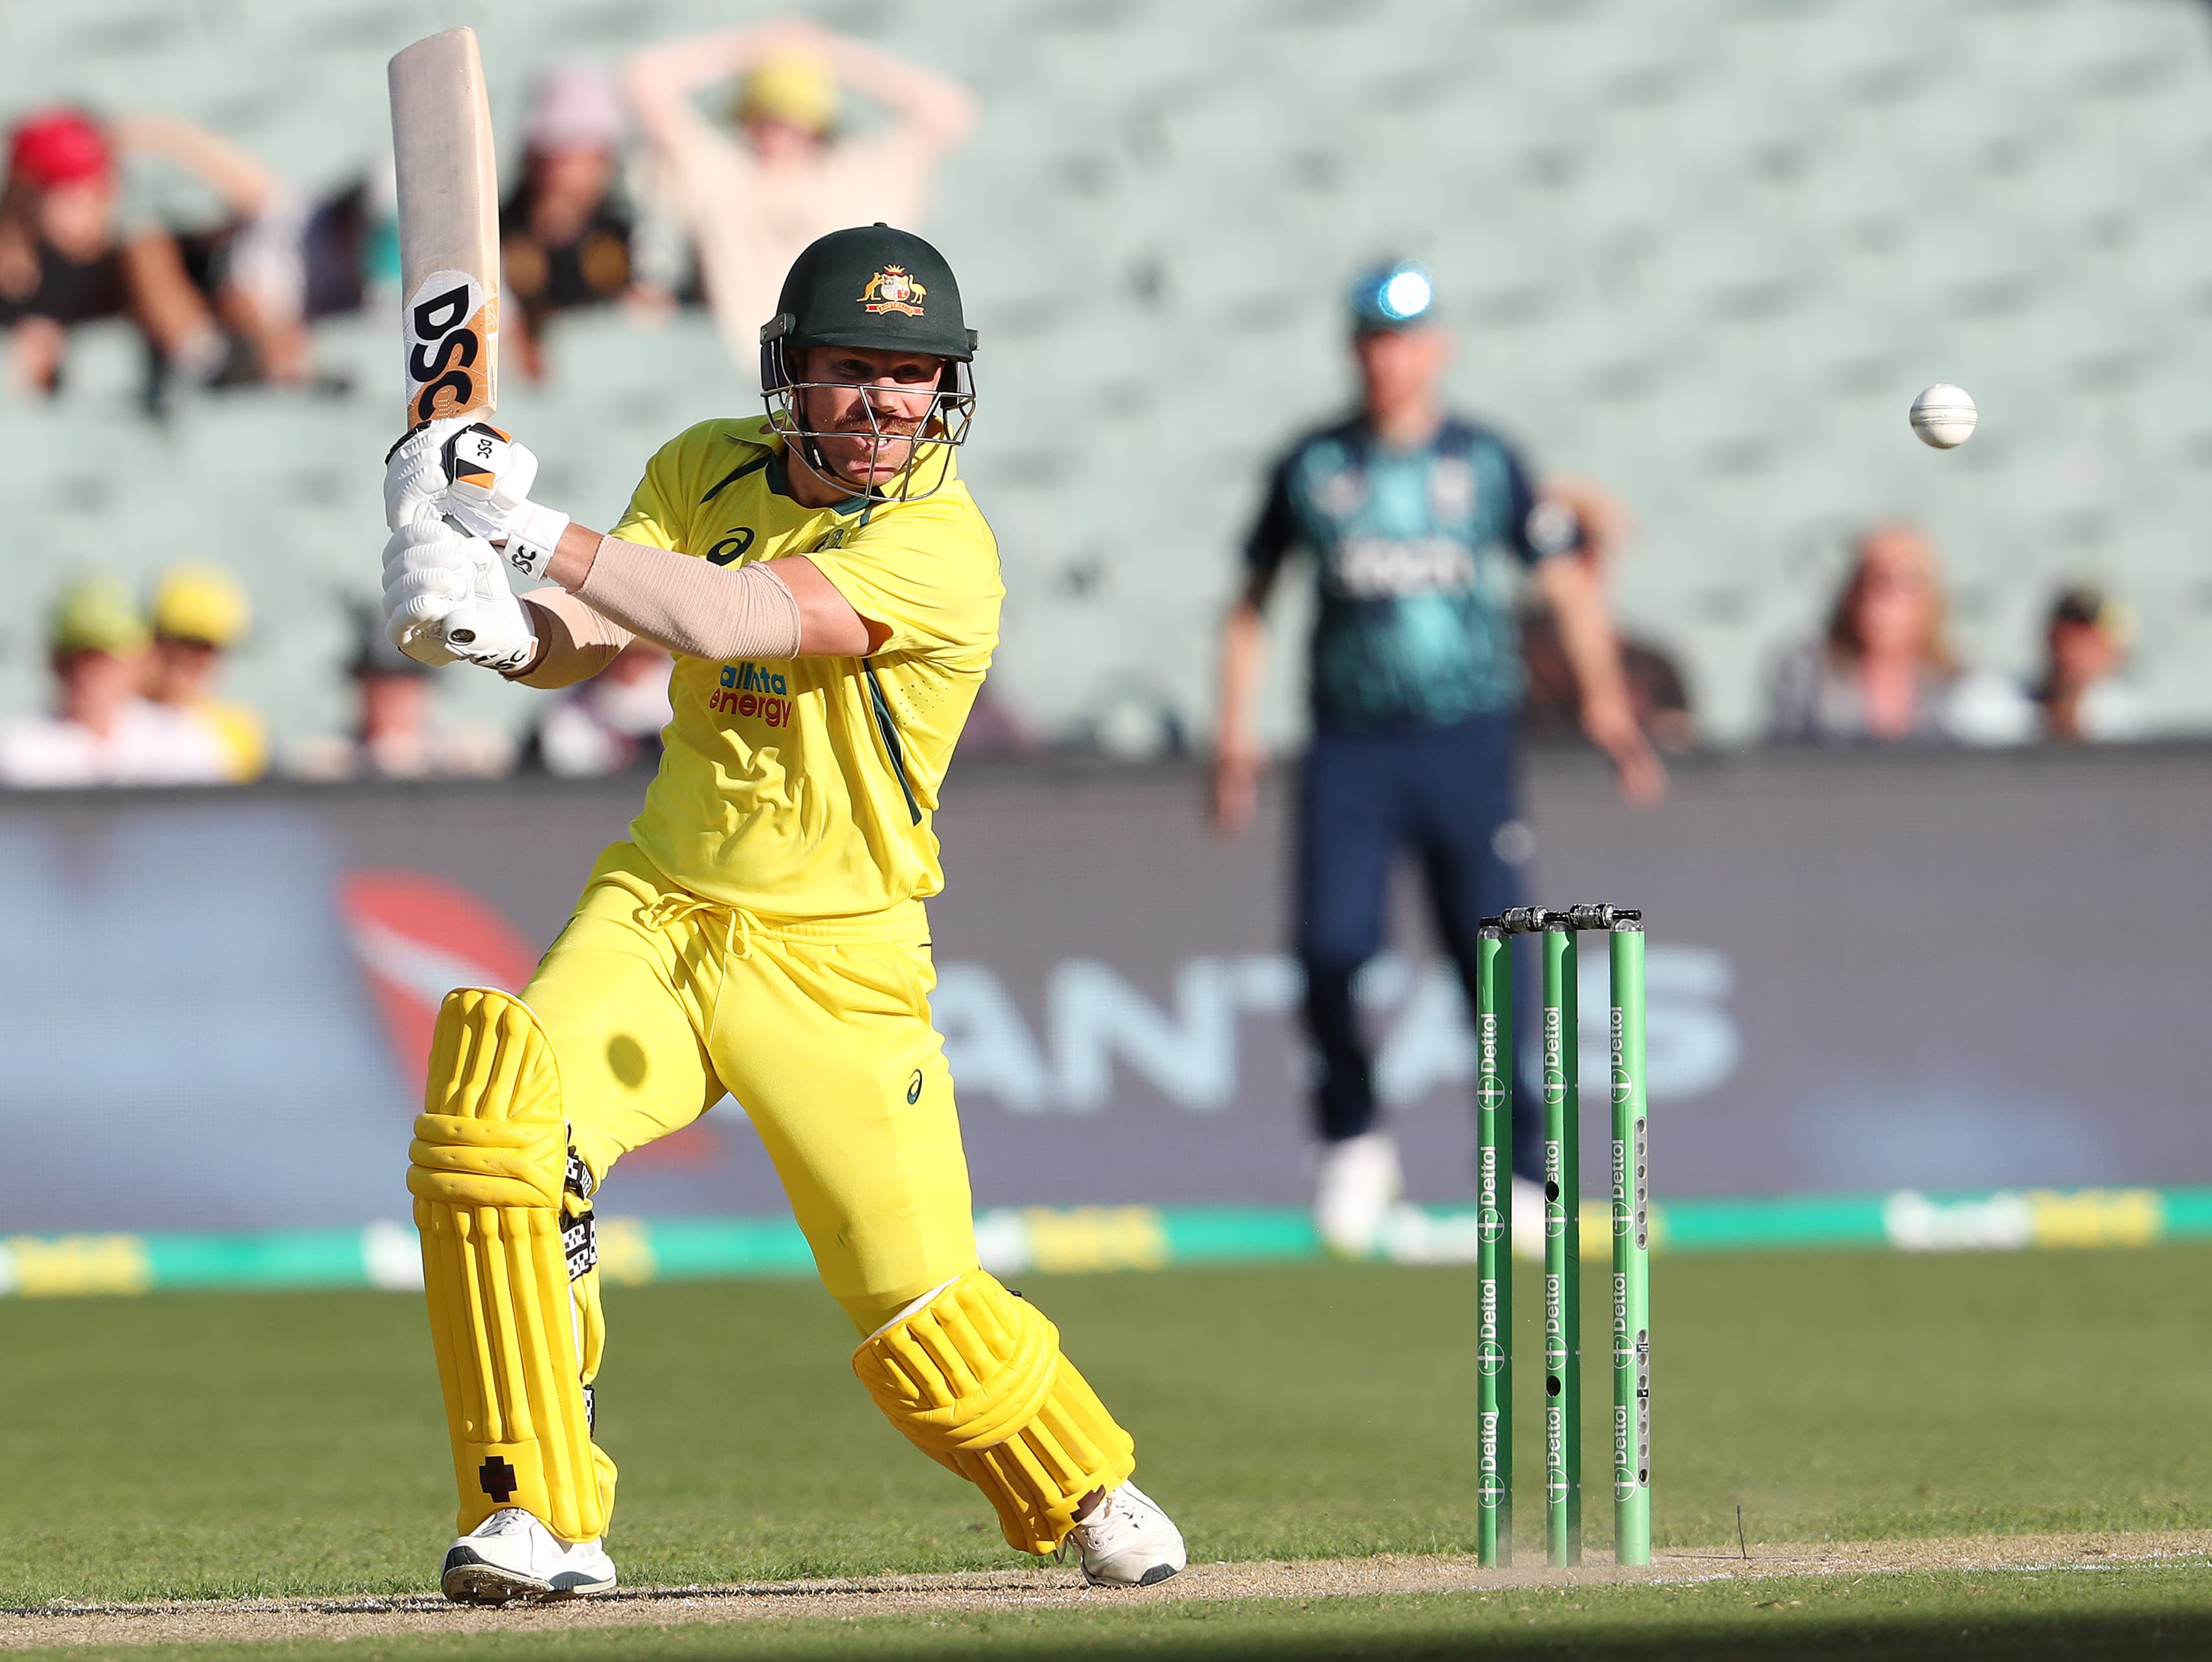 AUS vs ENG, 2nd ODI: Australia have won the toss and have opted to bat